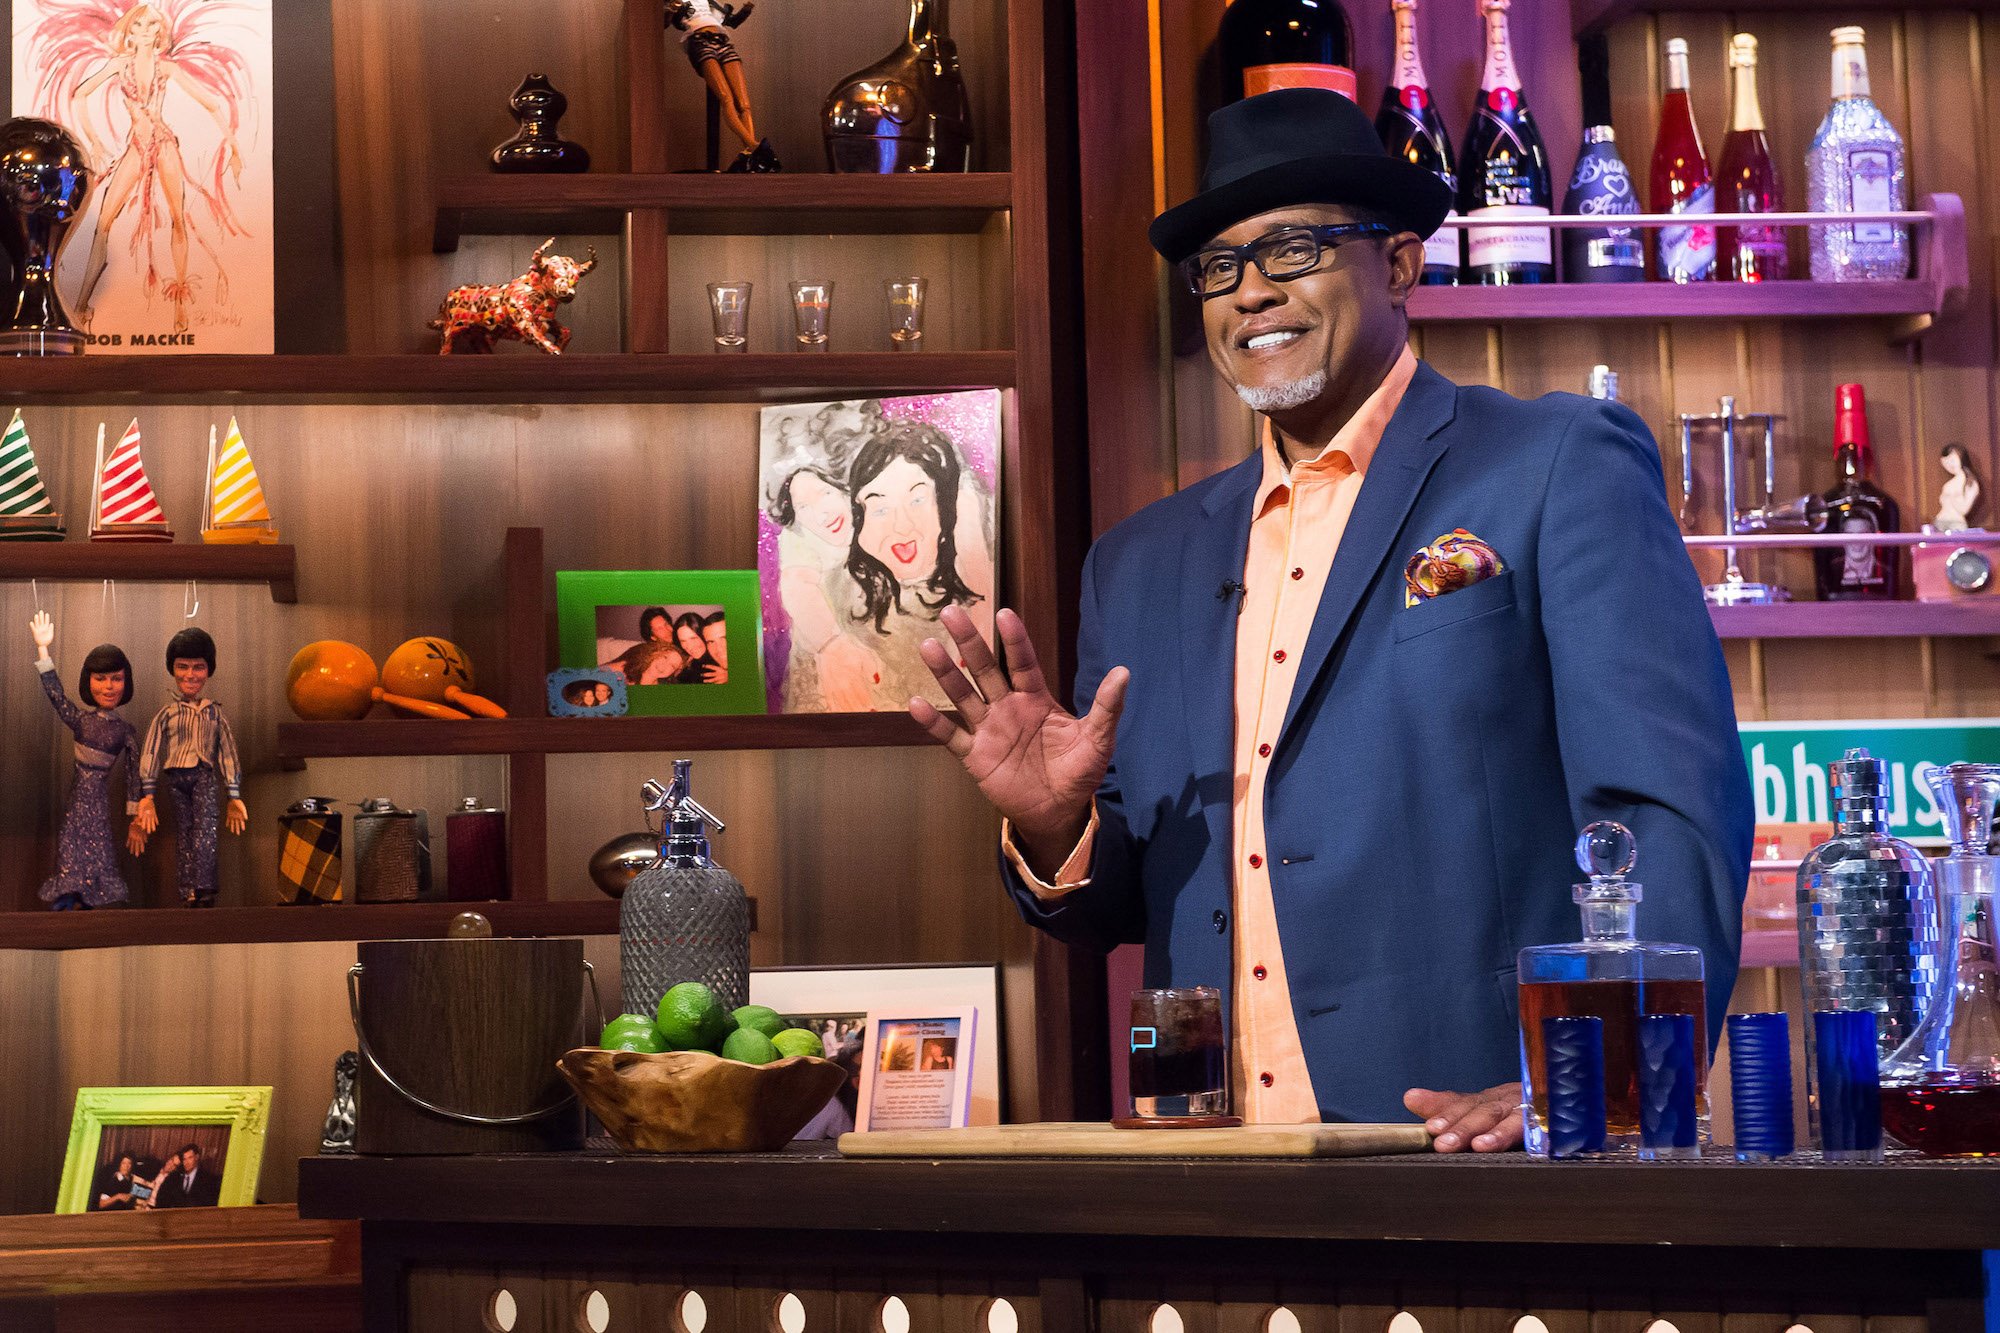 Gregg Leakes appearing on 'Watch What Happens Live' Season 13